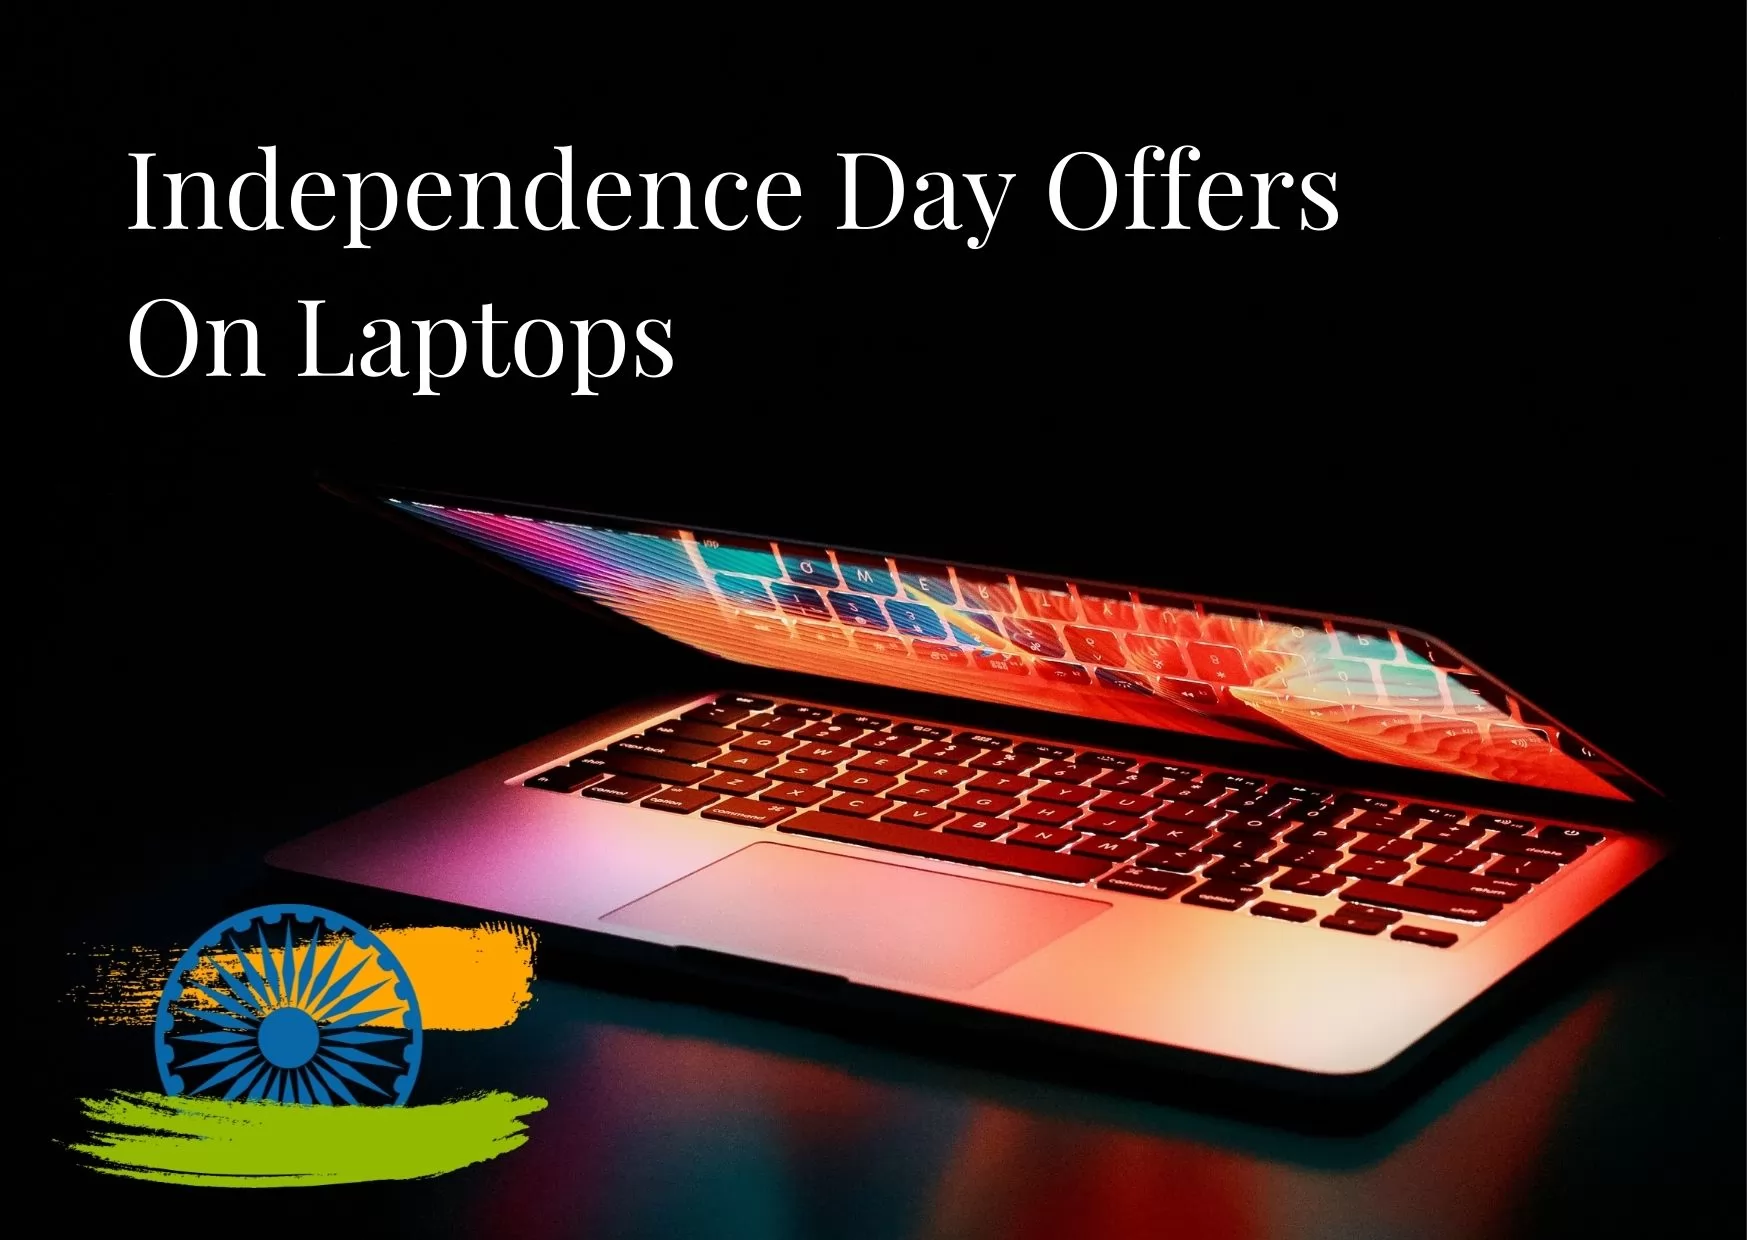 Independence Day Offers on Laptops - Best Features, Prices, Specifications And More